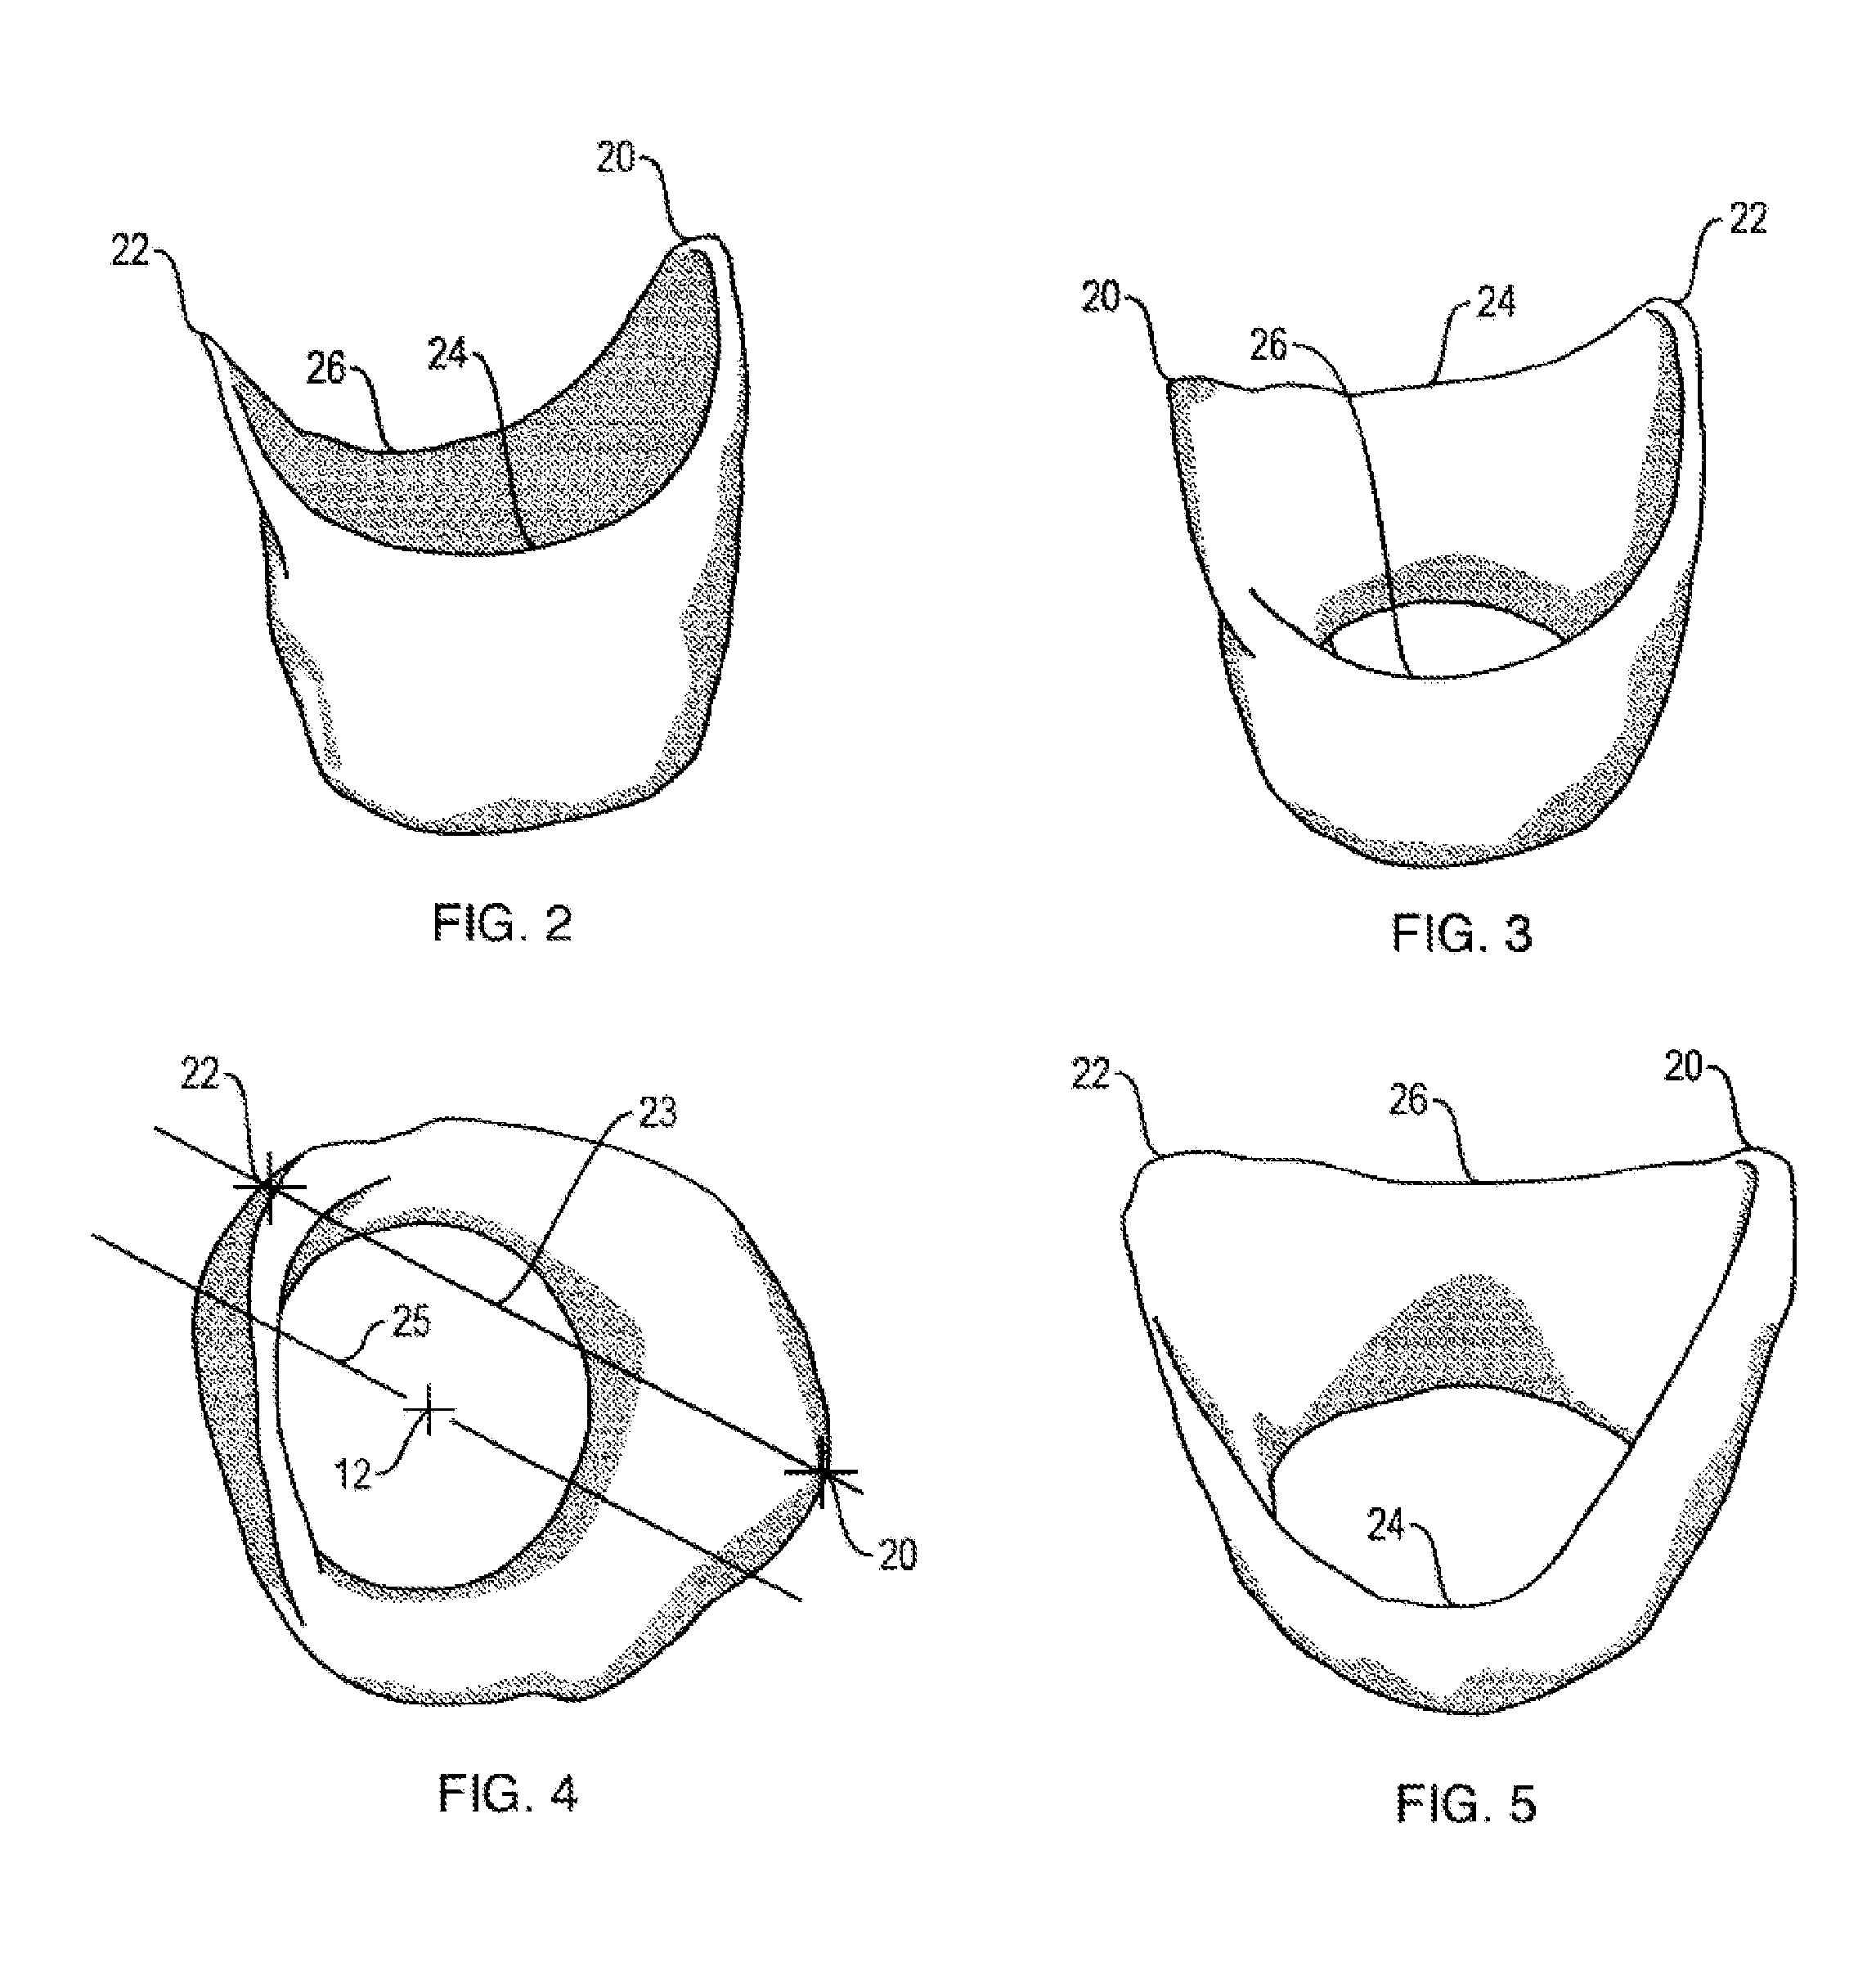 Method and apparatus for recording spatial gingival soft tissue relationship to implant placement within alveolar bone for immediate-implant placement